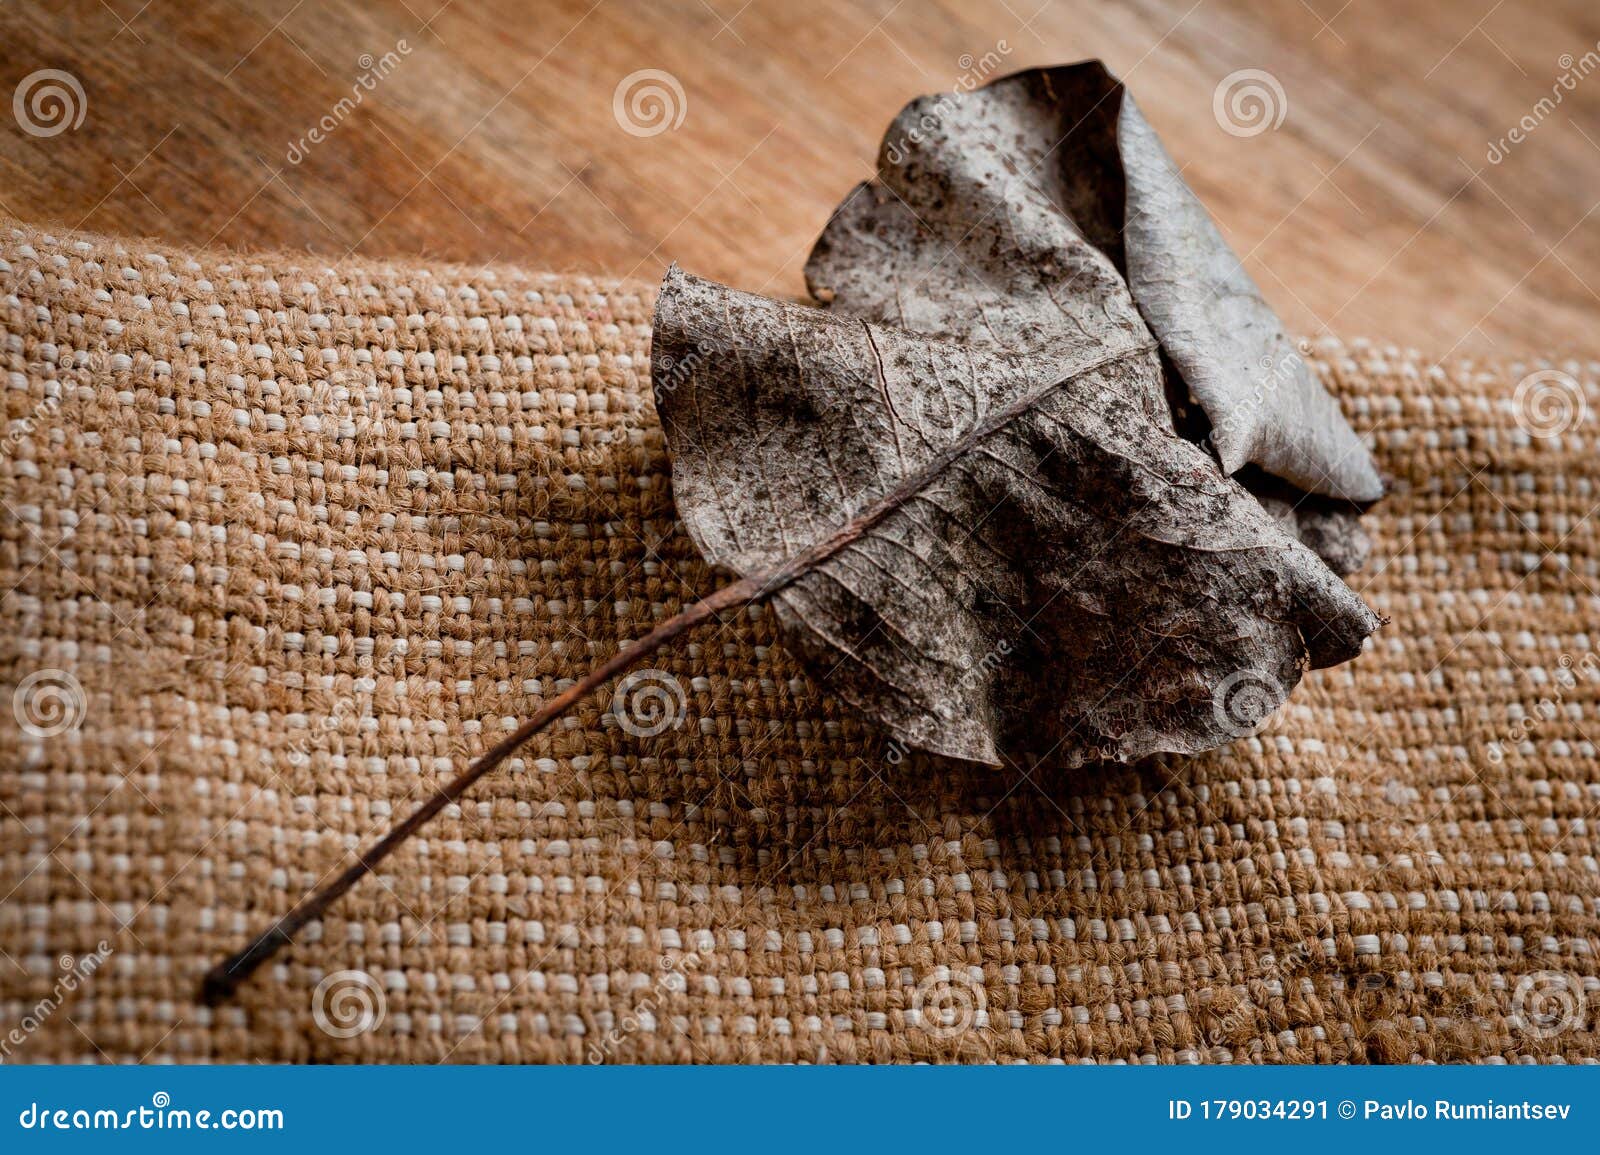 an old, withered twisted leaf from a tree, photographed on a cracked wooden surface. izes the old and the frailty of